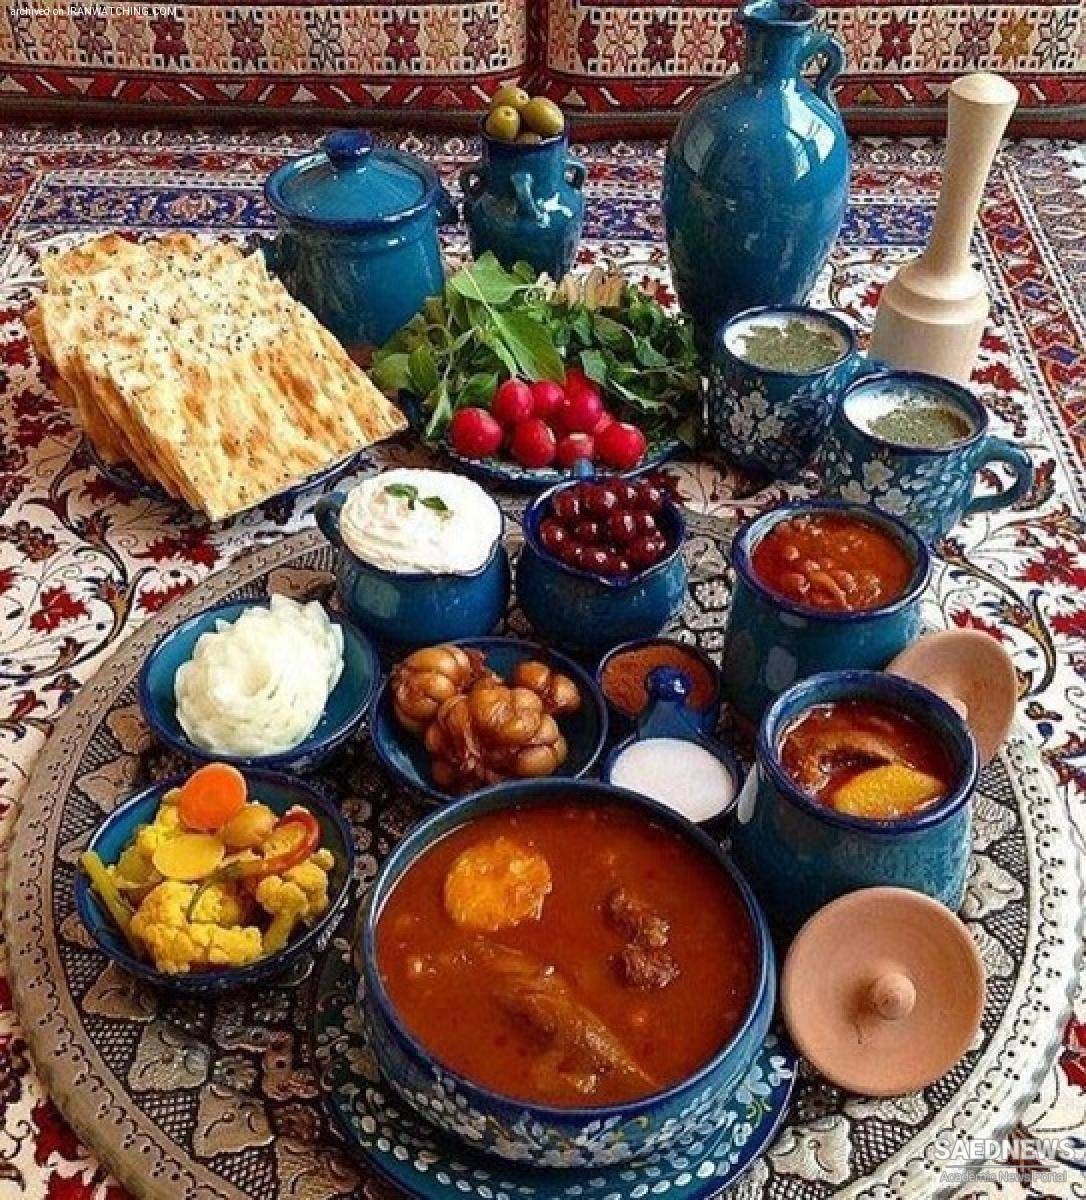 Dining Culture in Iranian Houses: How to Eat When You Are a Guest?